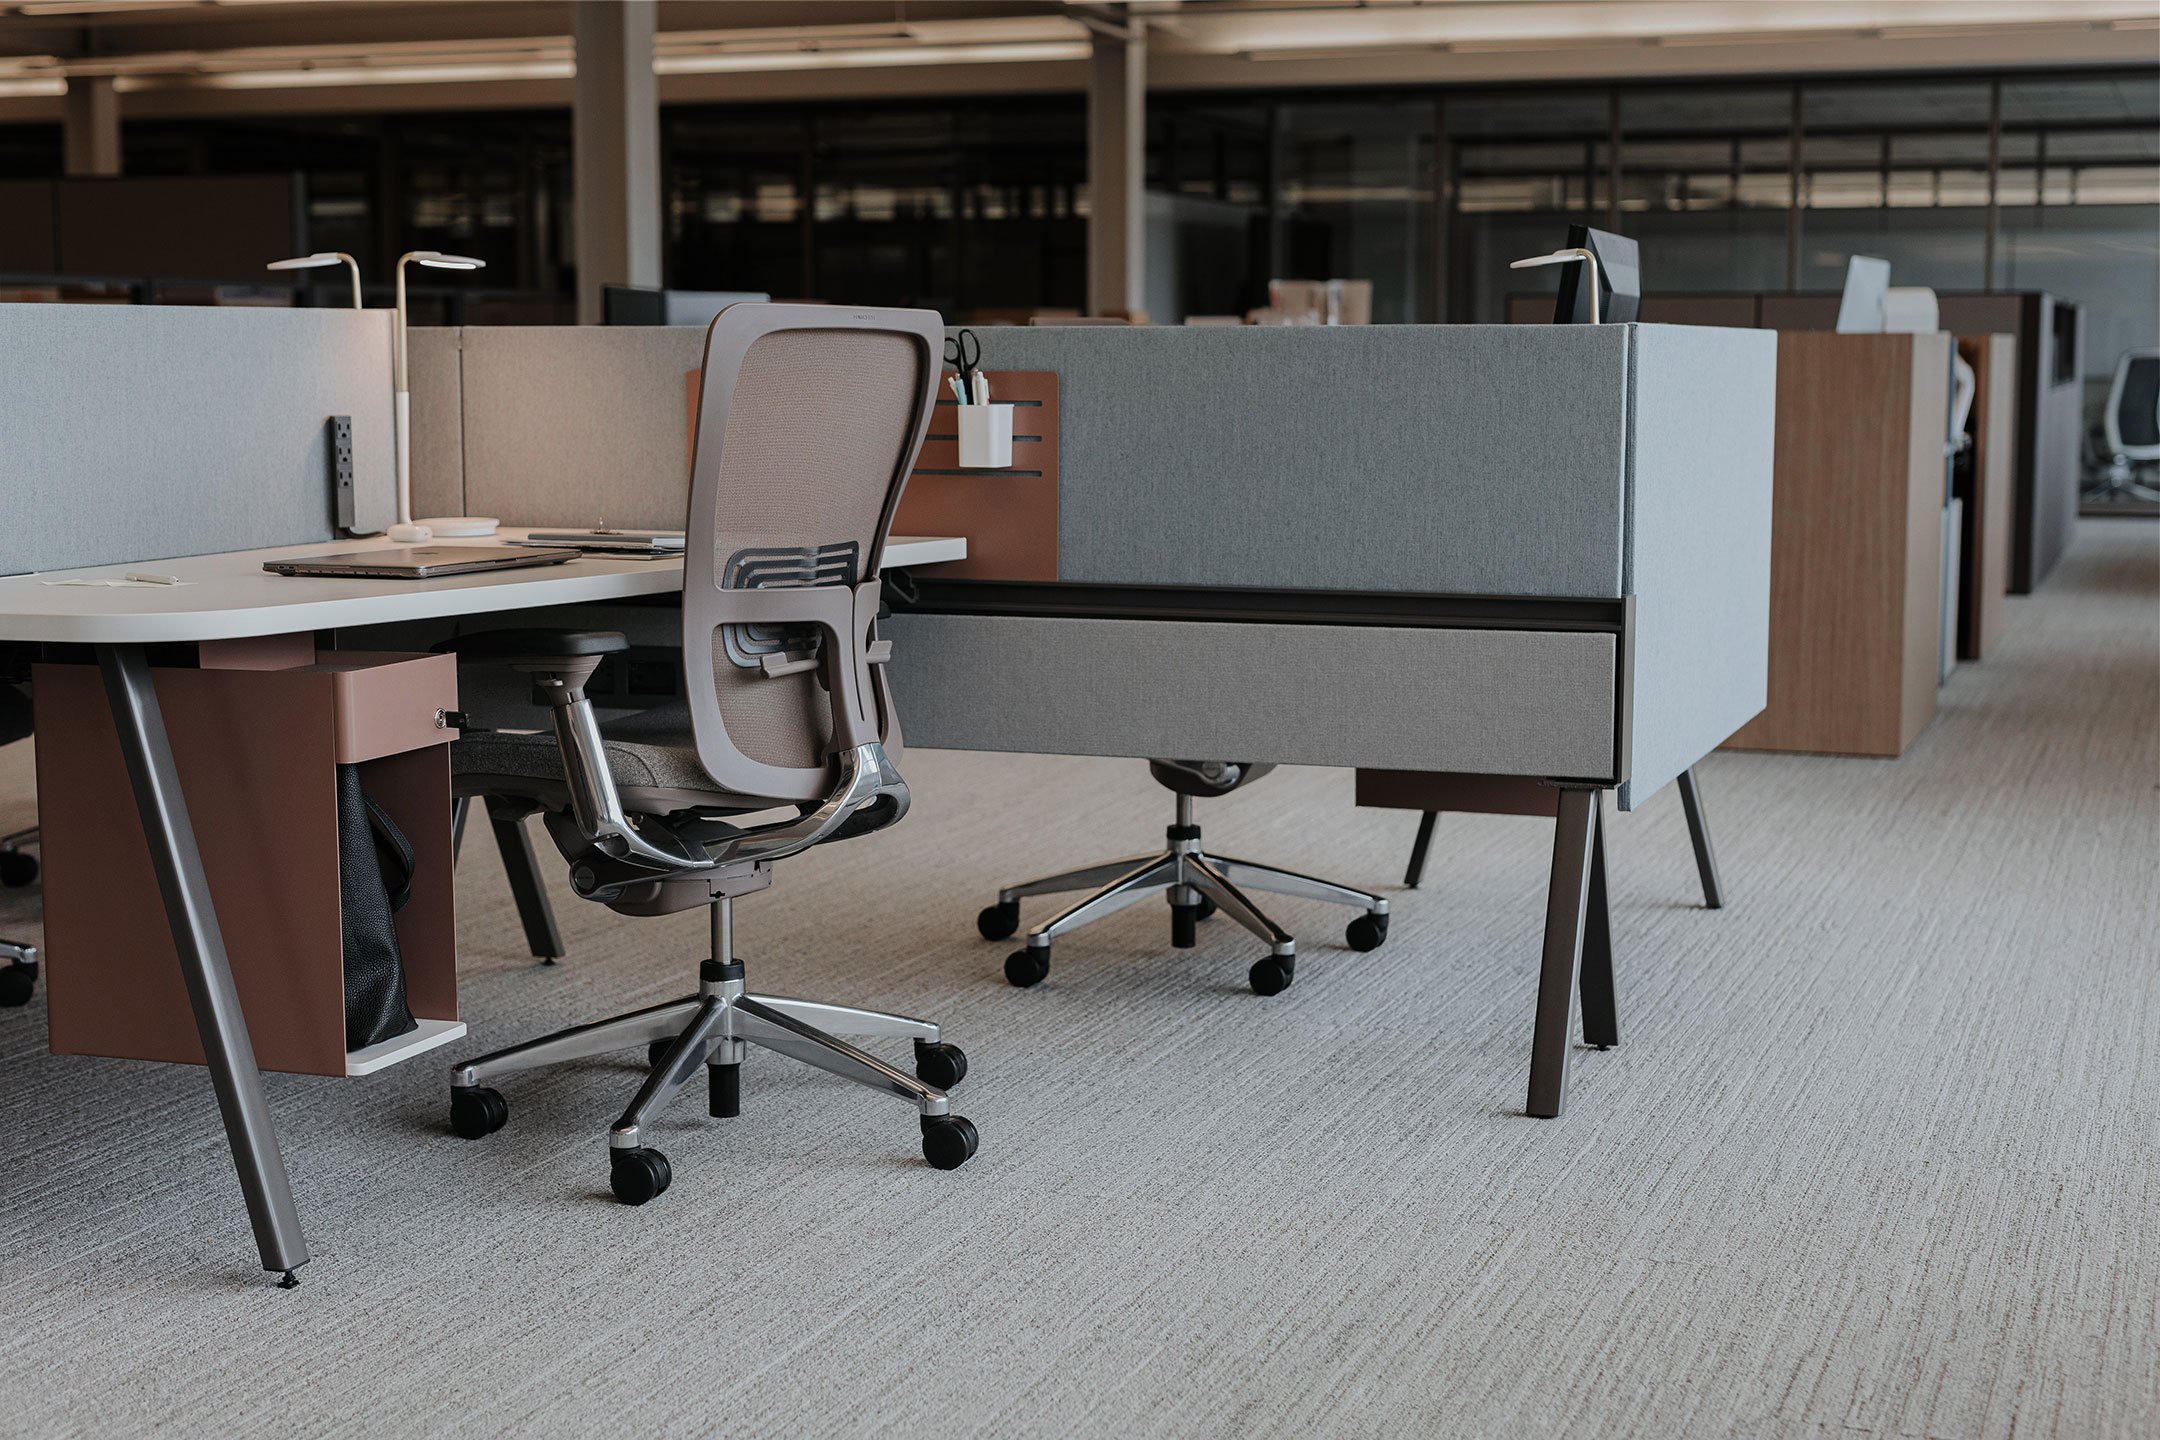 Haworth Compose Beam divider in office space with desk and chair 